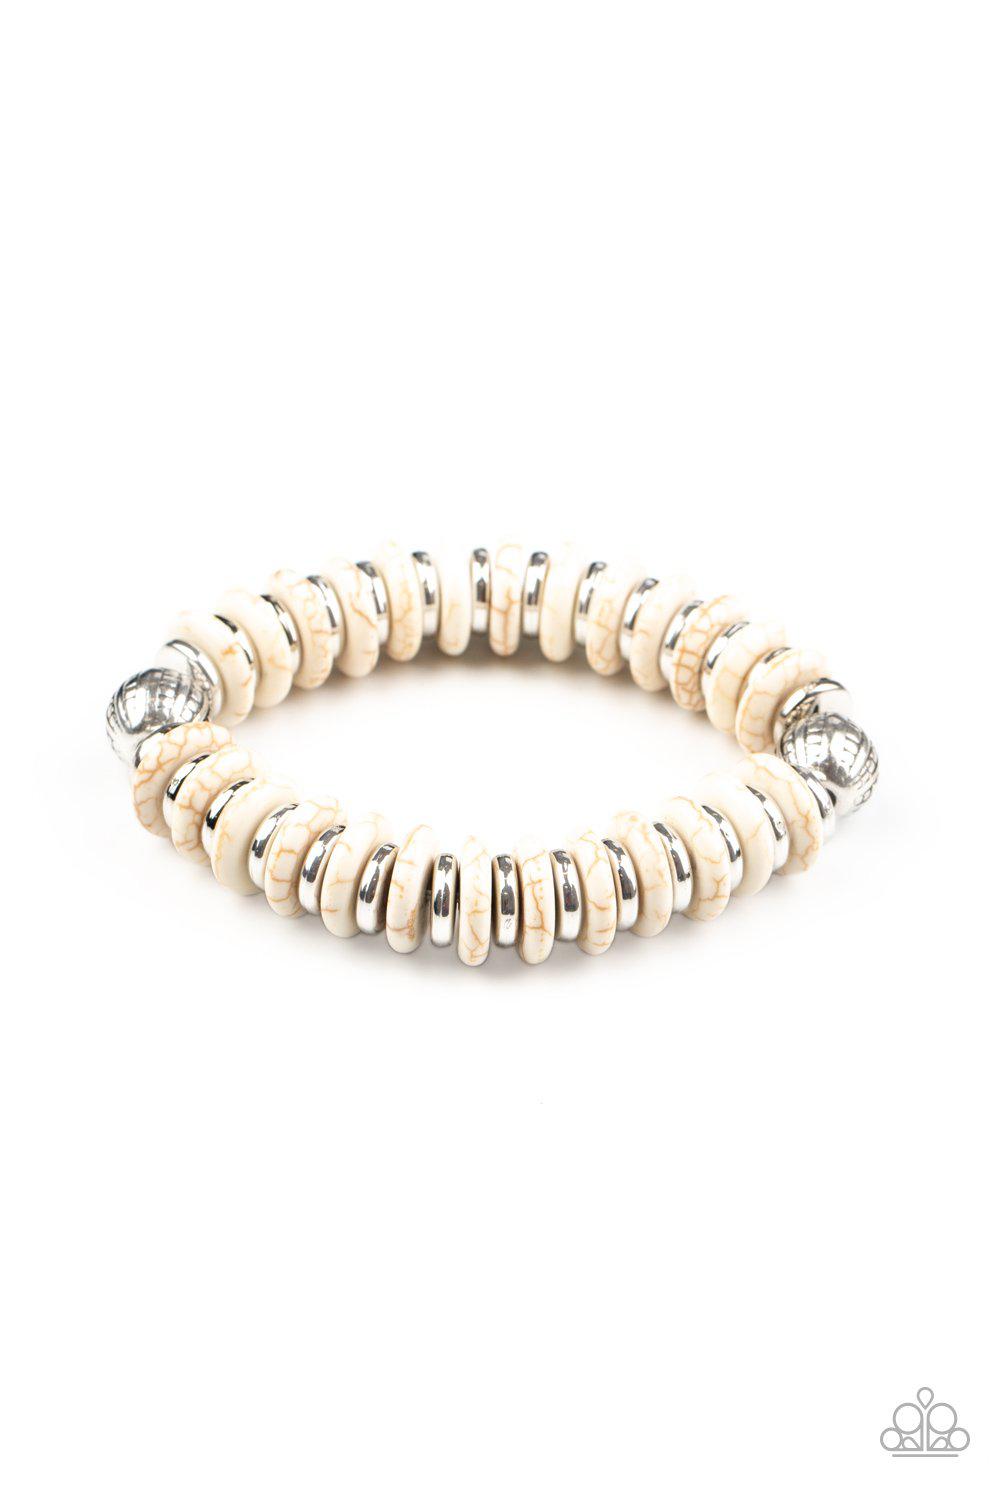 Eco Experience White Stone and Silver Bracelet - Paparazzi Accessories - lightbox -CarasShop.com - $5 Jewelry by Cara Jewels